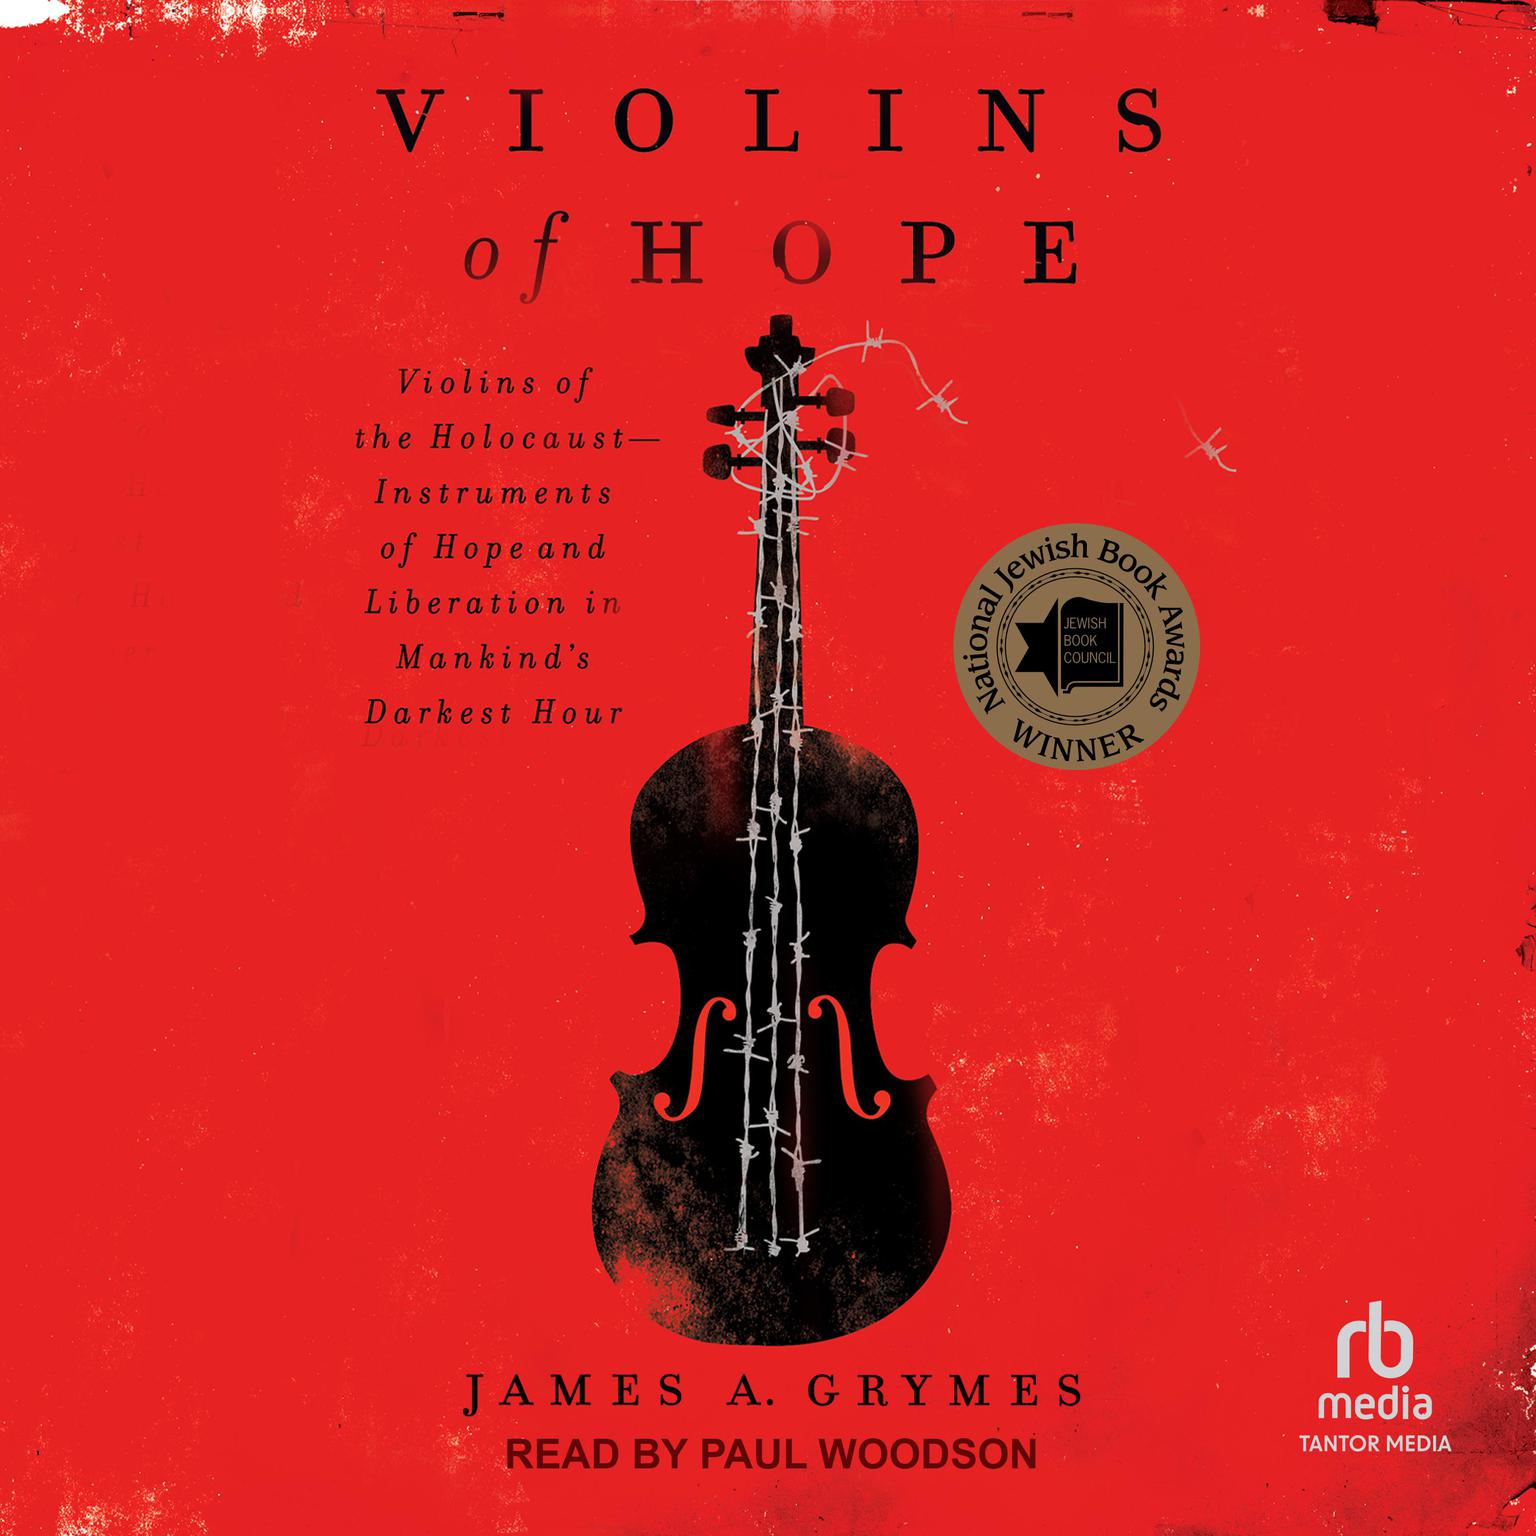 Violins of Hope: Violins of the Holocaust-Instruments of Hope and Liberation in Mankinds Darkest Hour Audiobook, by James A. Grymes